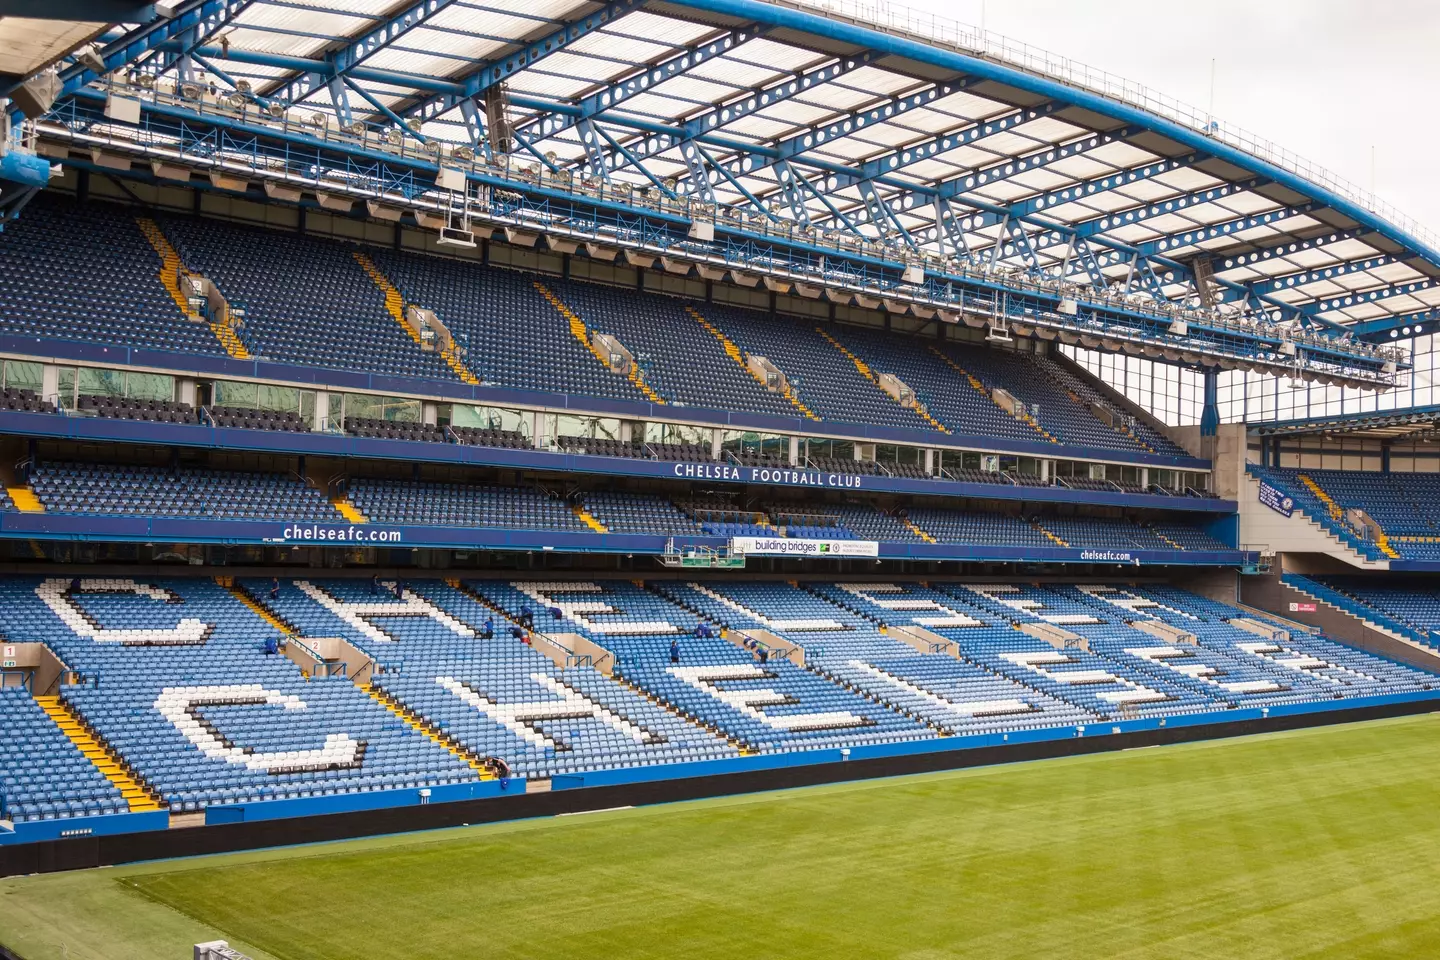 Three parties are interested in buying the Stamford Bridge club (Image: PA)